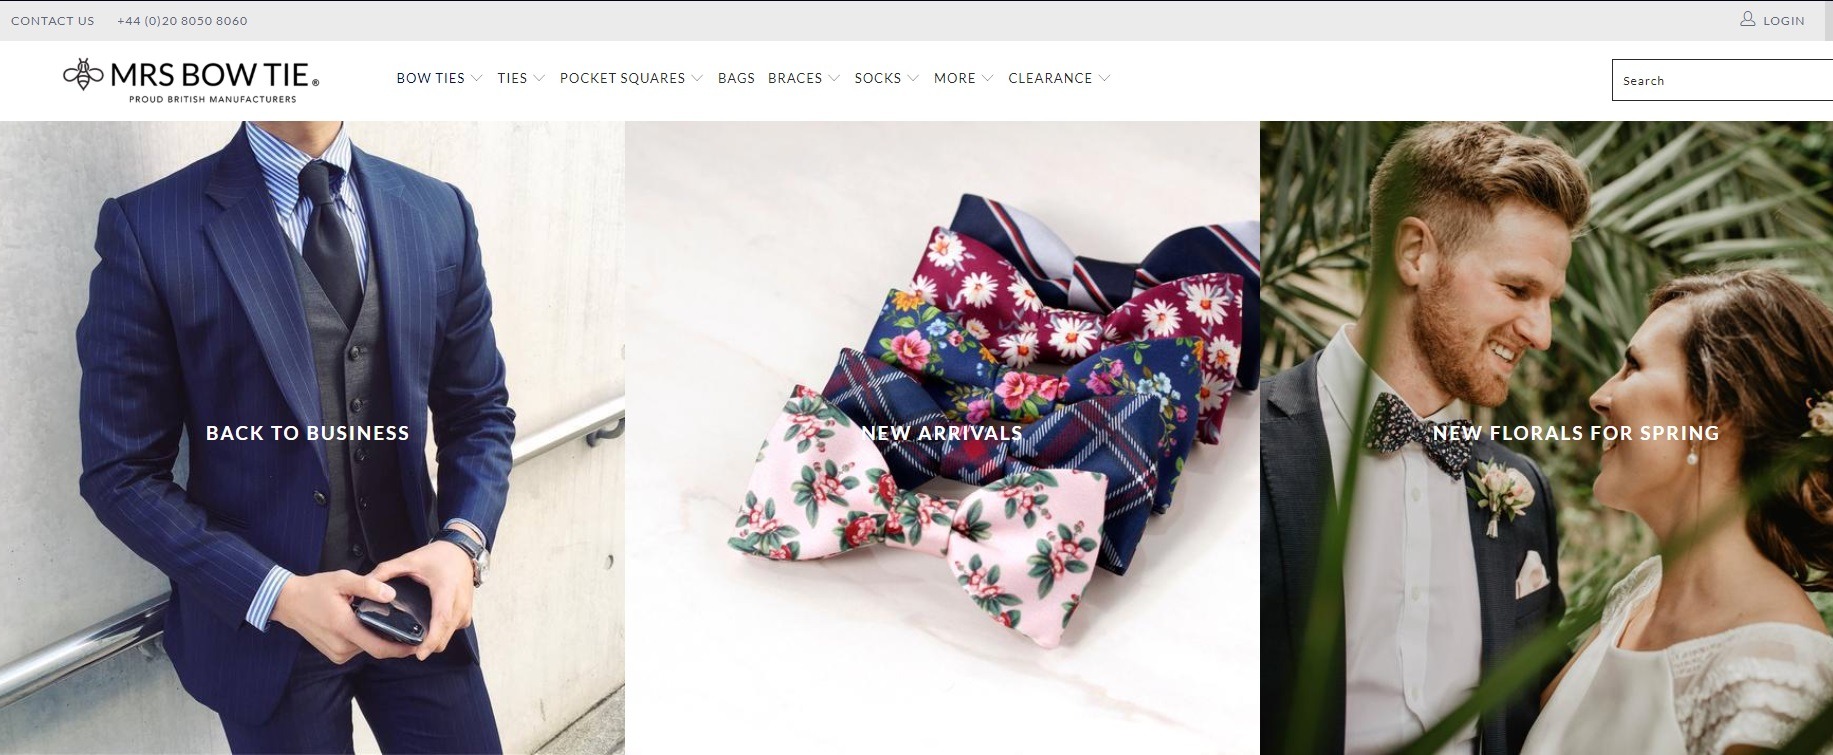 store to buy great bowties online